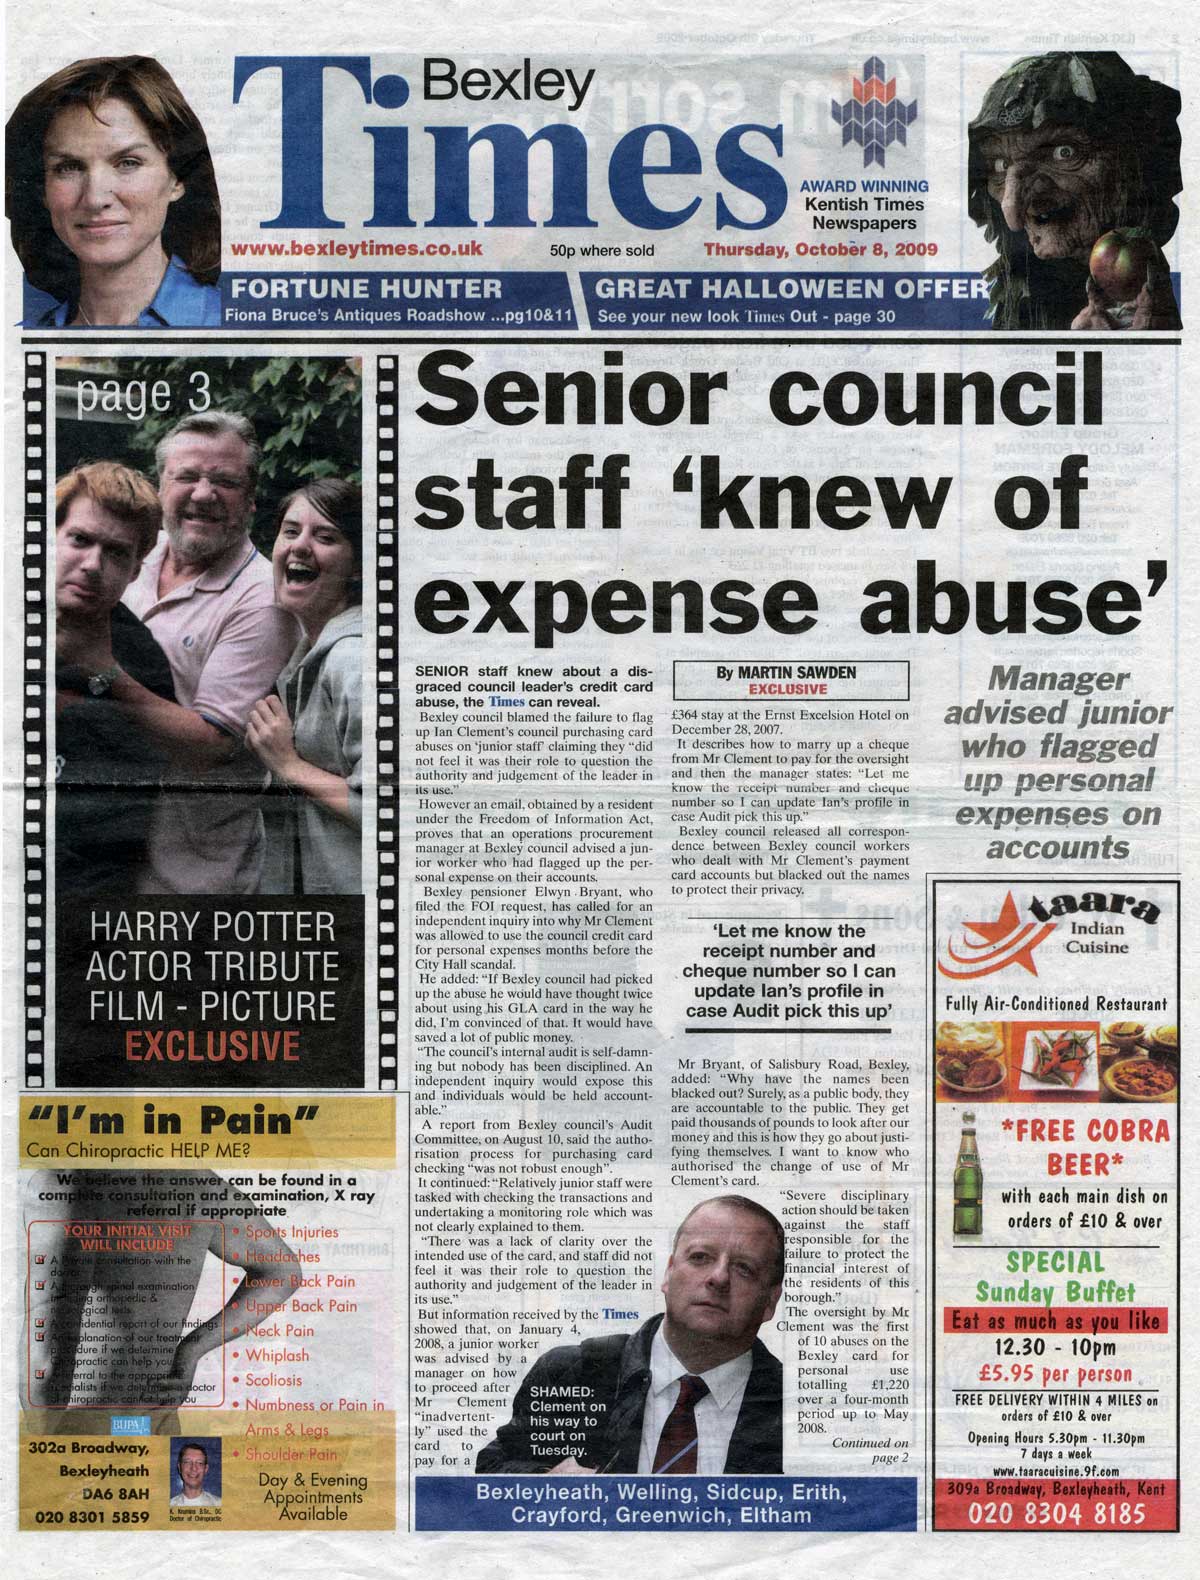 Bexley Times, 6 October 2009, page 1